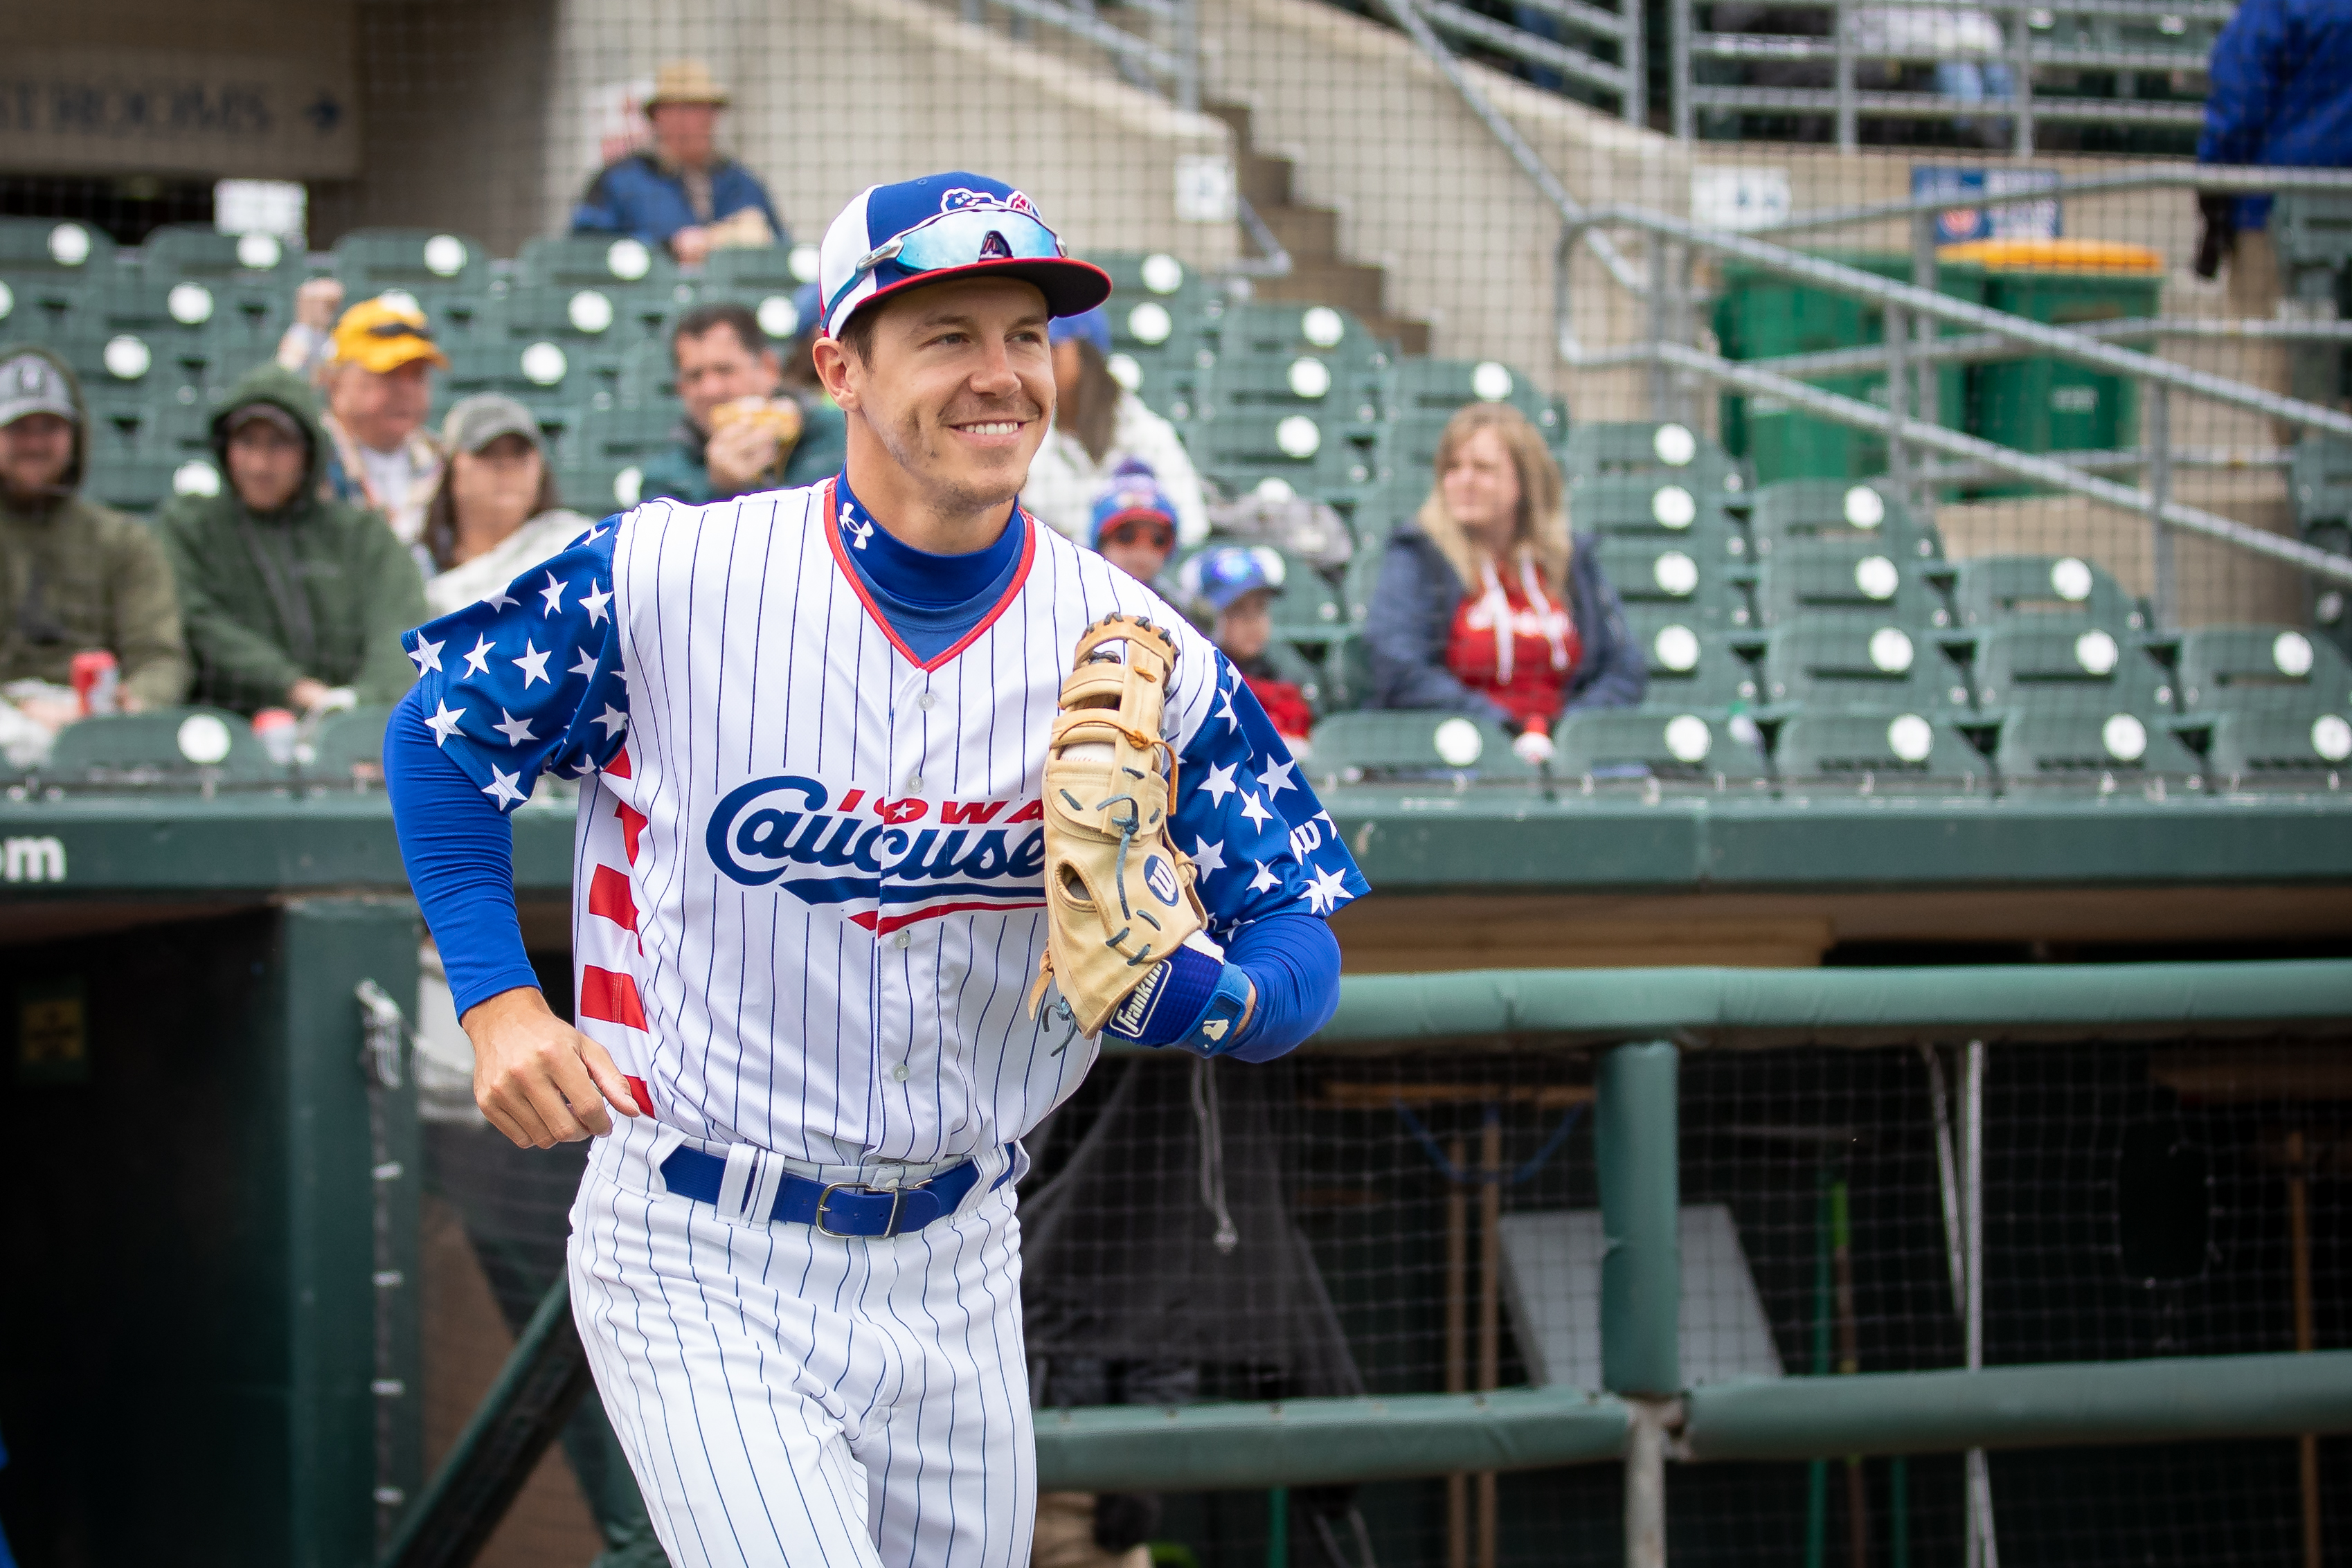 Iowa Cubs on X: Wednesday, June 14, is Flag Day, and the Iowa